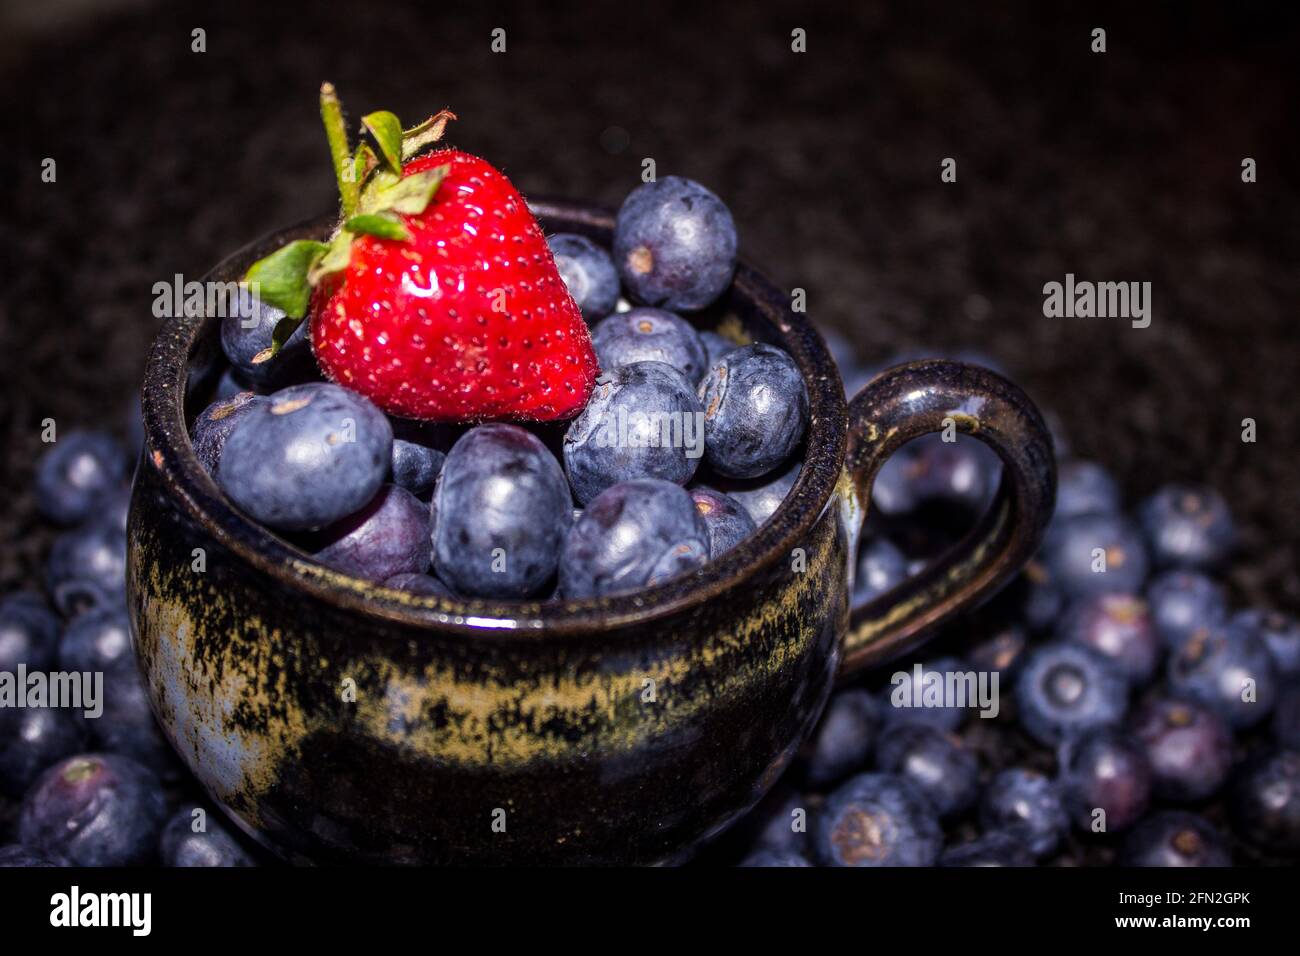 A single bright red Strawberry on top of a black tea-cup, filled with large indigo colored Blue berries Stock Photo